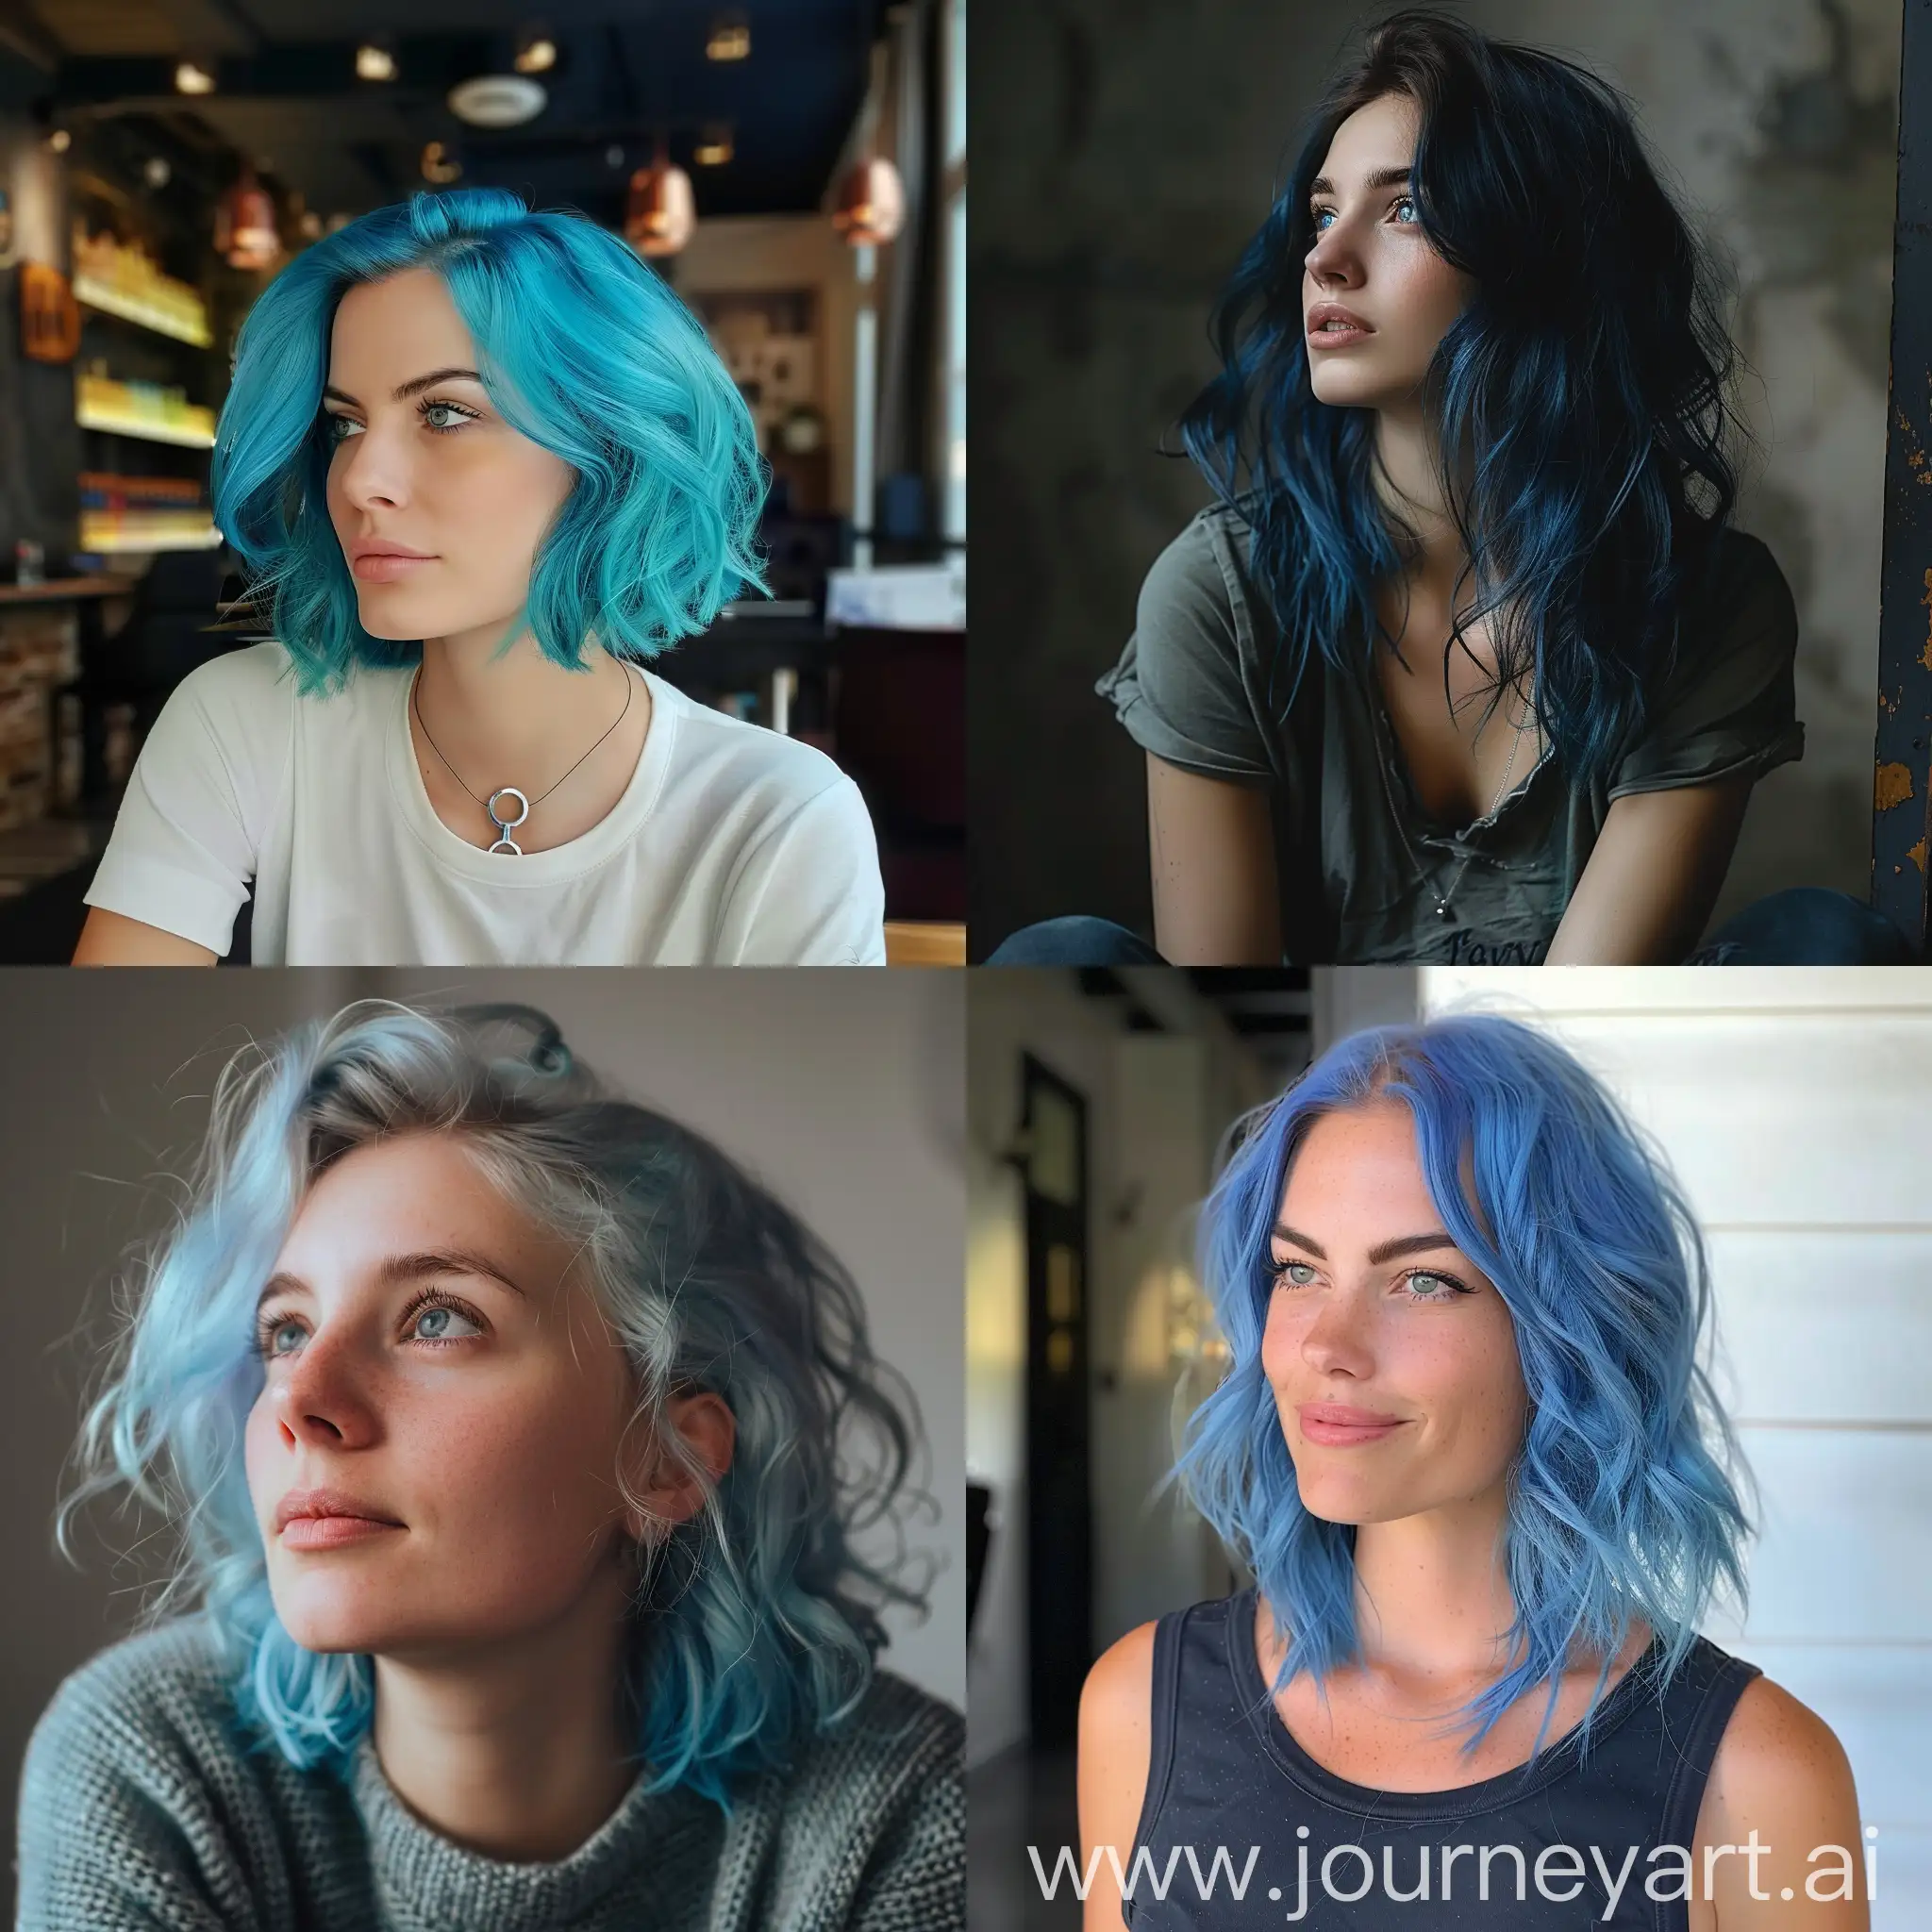 Mysterious-Woman-with-Blue-Hair-Waiting